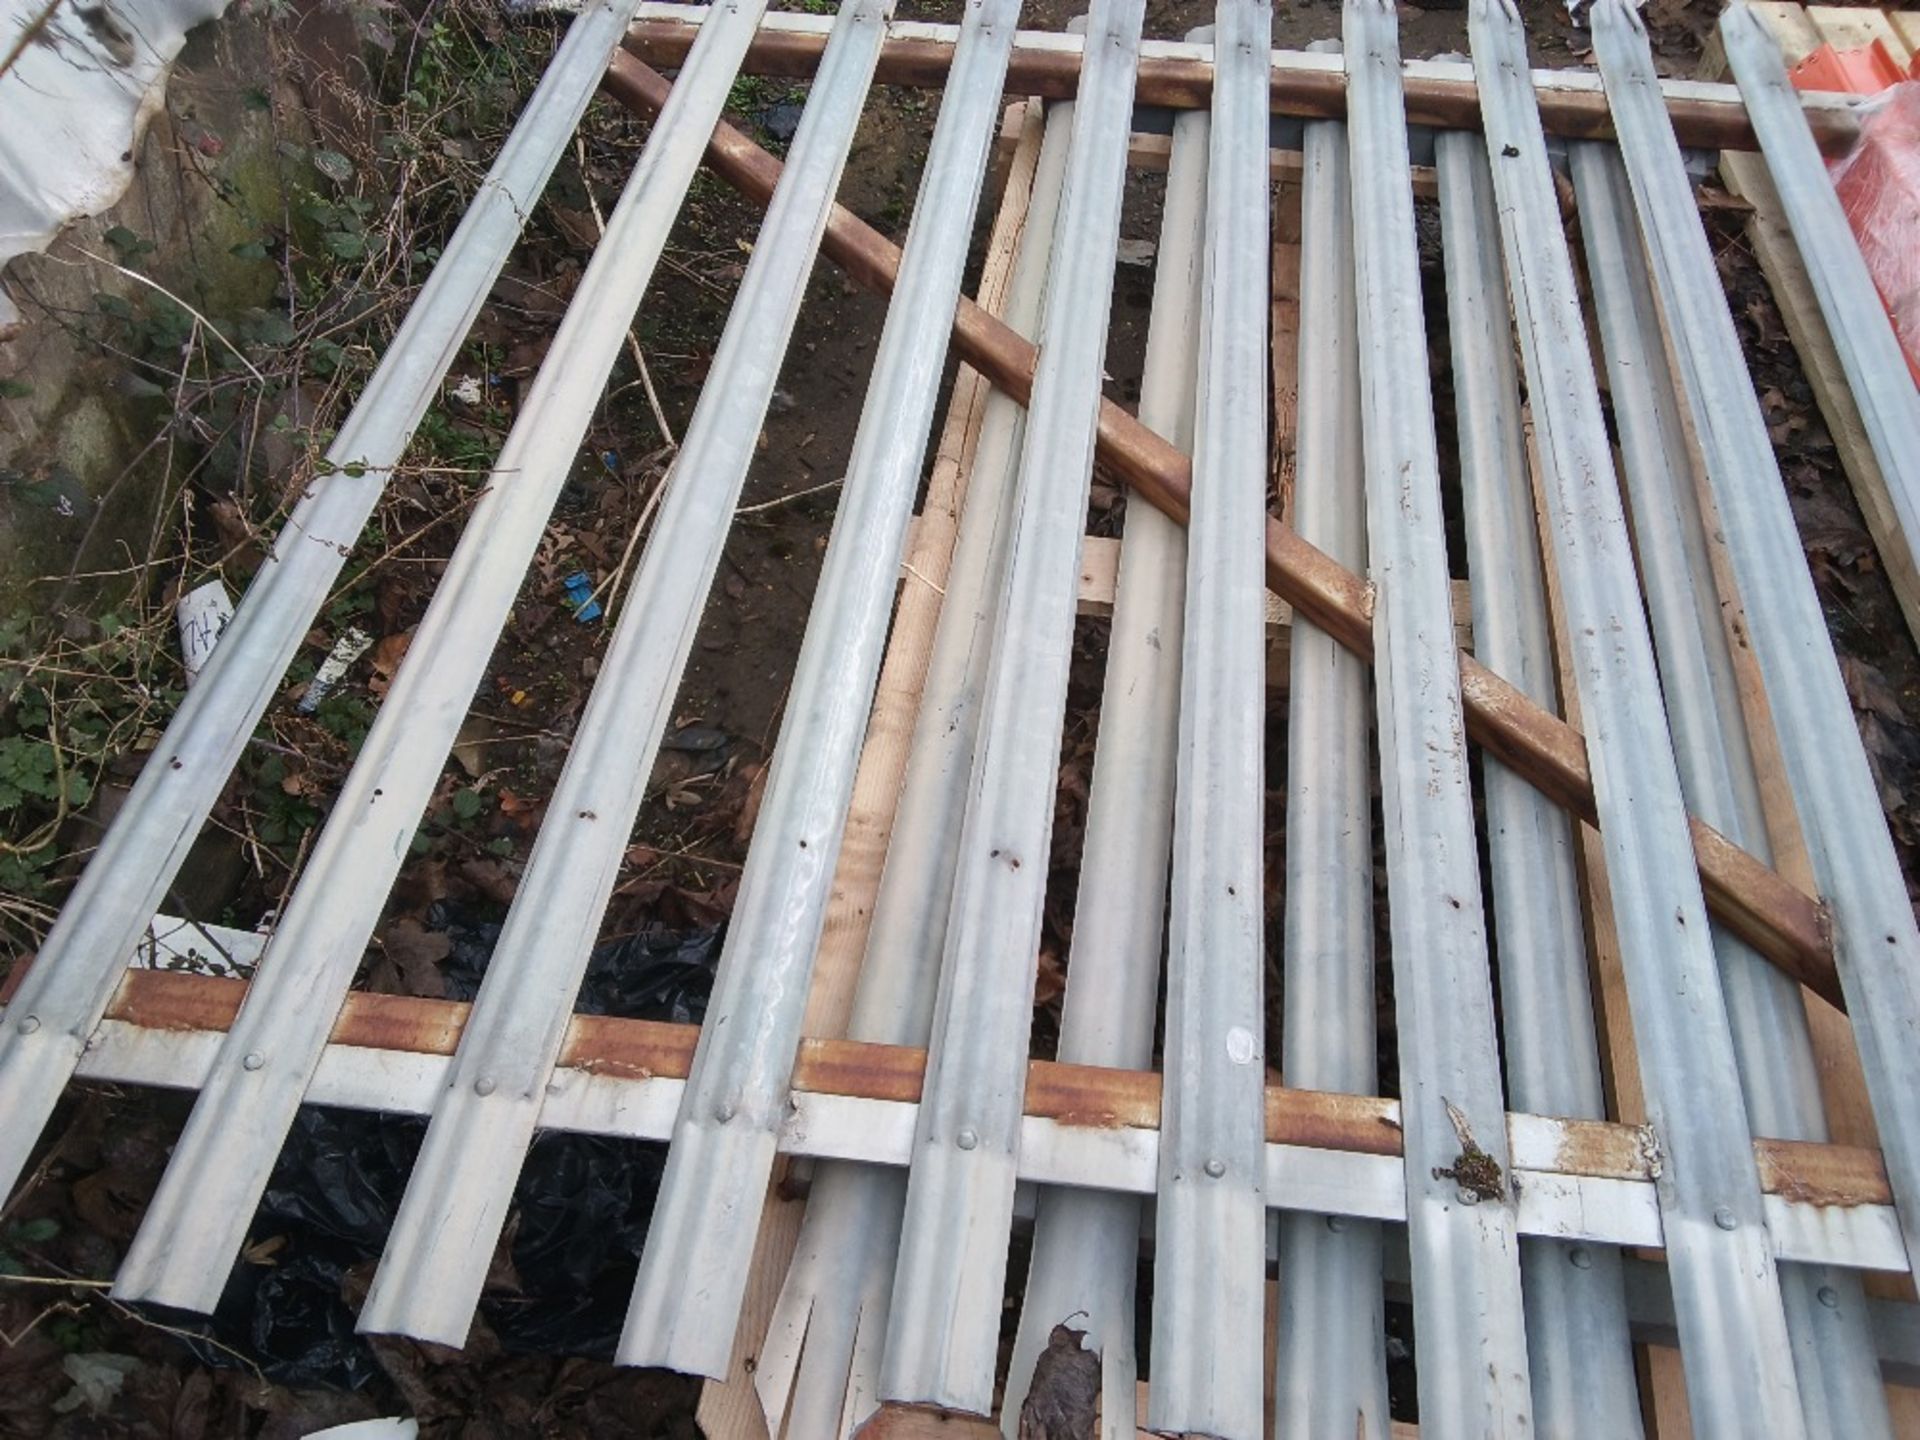 2 X PALISADE FENCE SECTIONS, 8FT TOTAL APPROX, 6FT HEIGHT APPROX. THIS LOT IS SOLD UNDER THE AUCT - Image 2 of 2